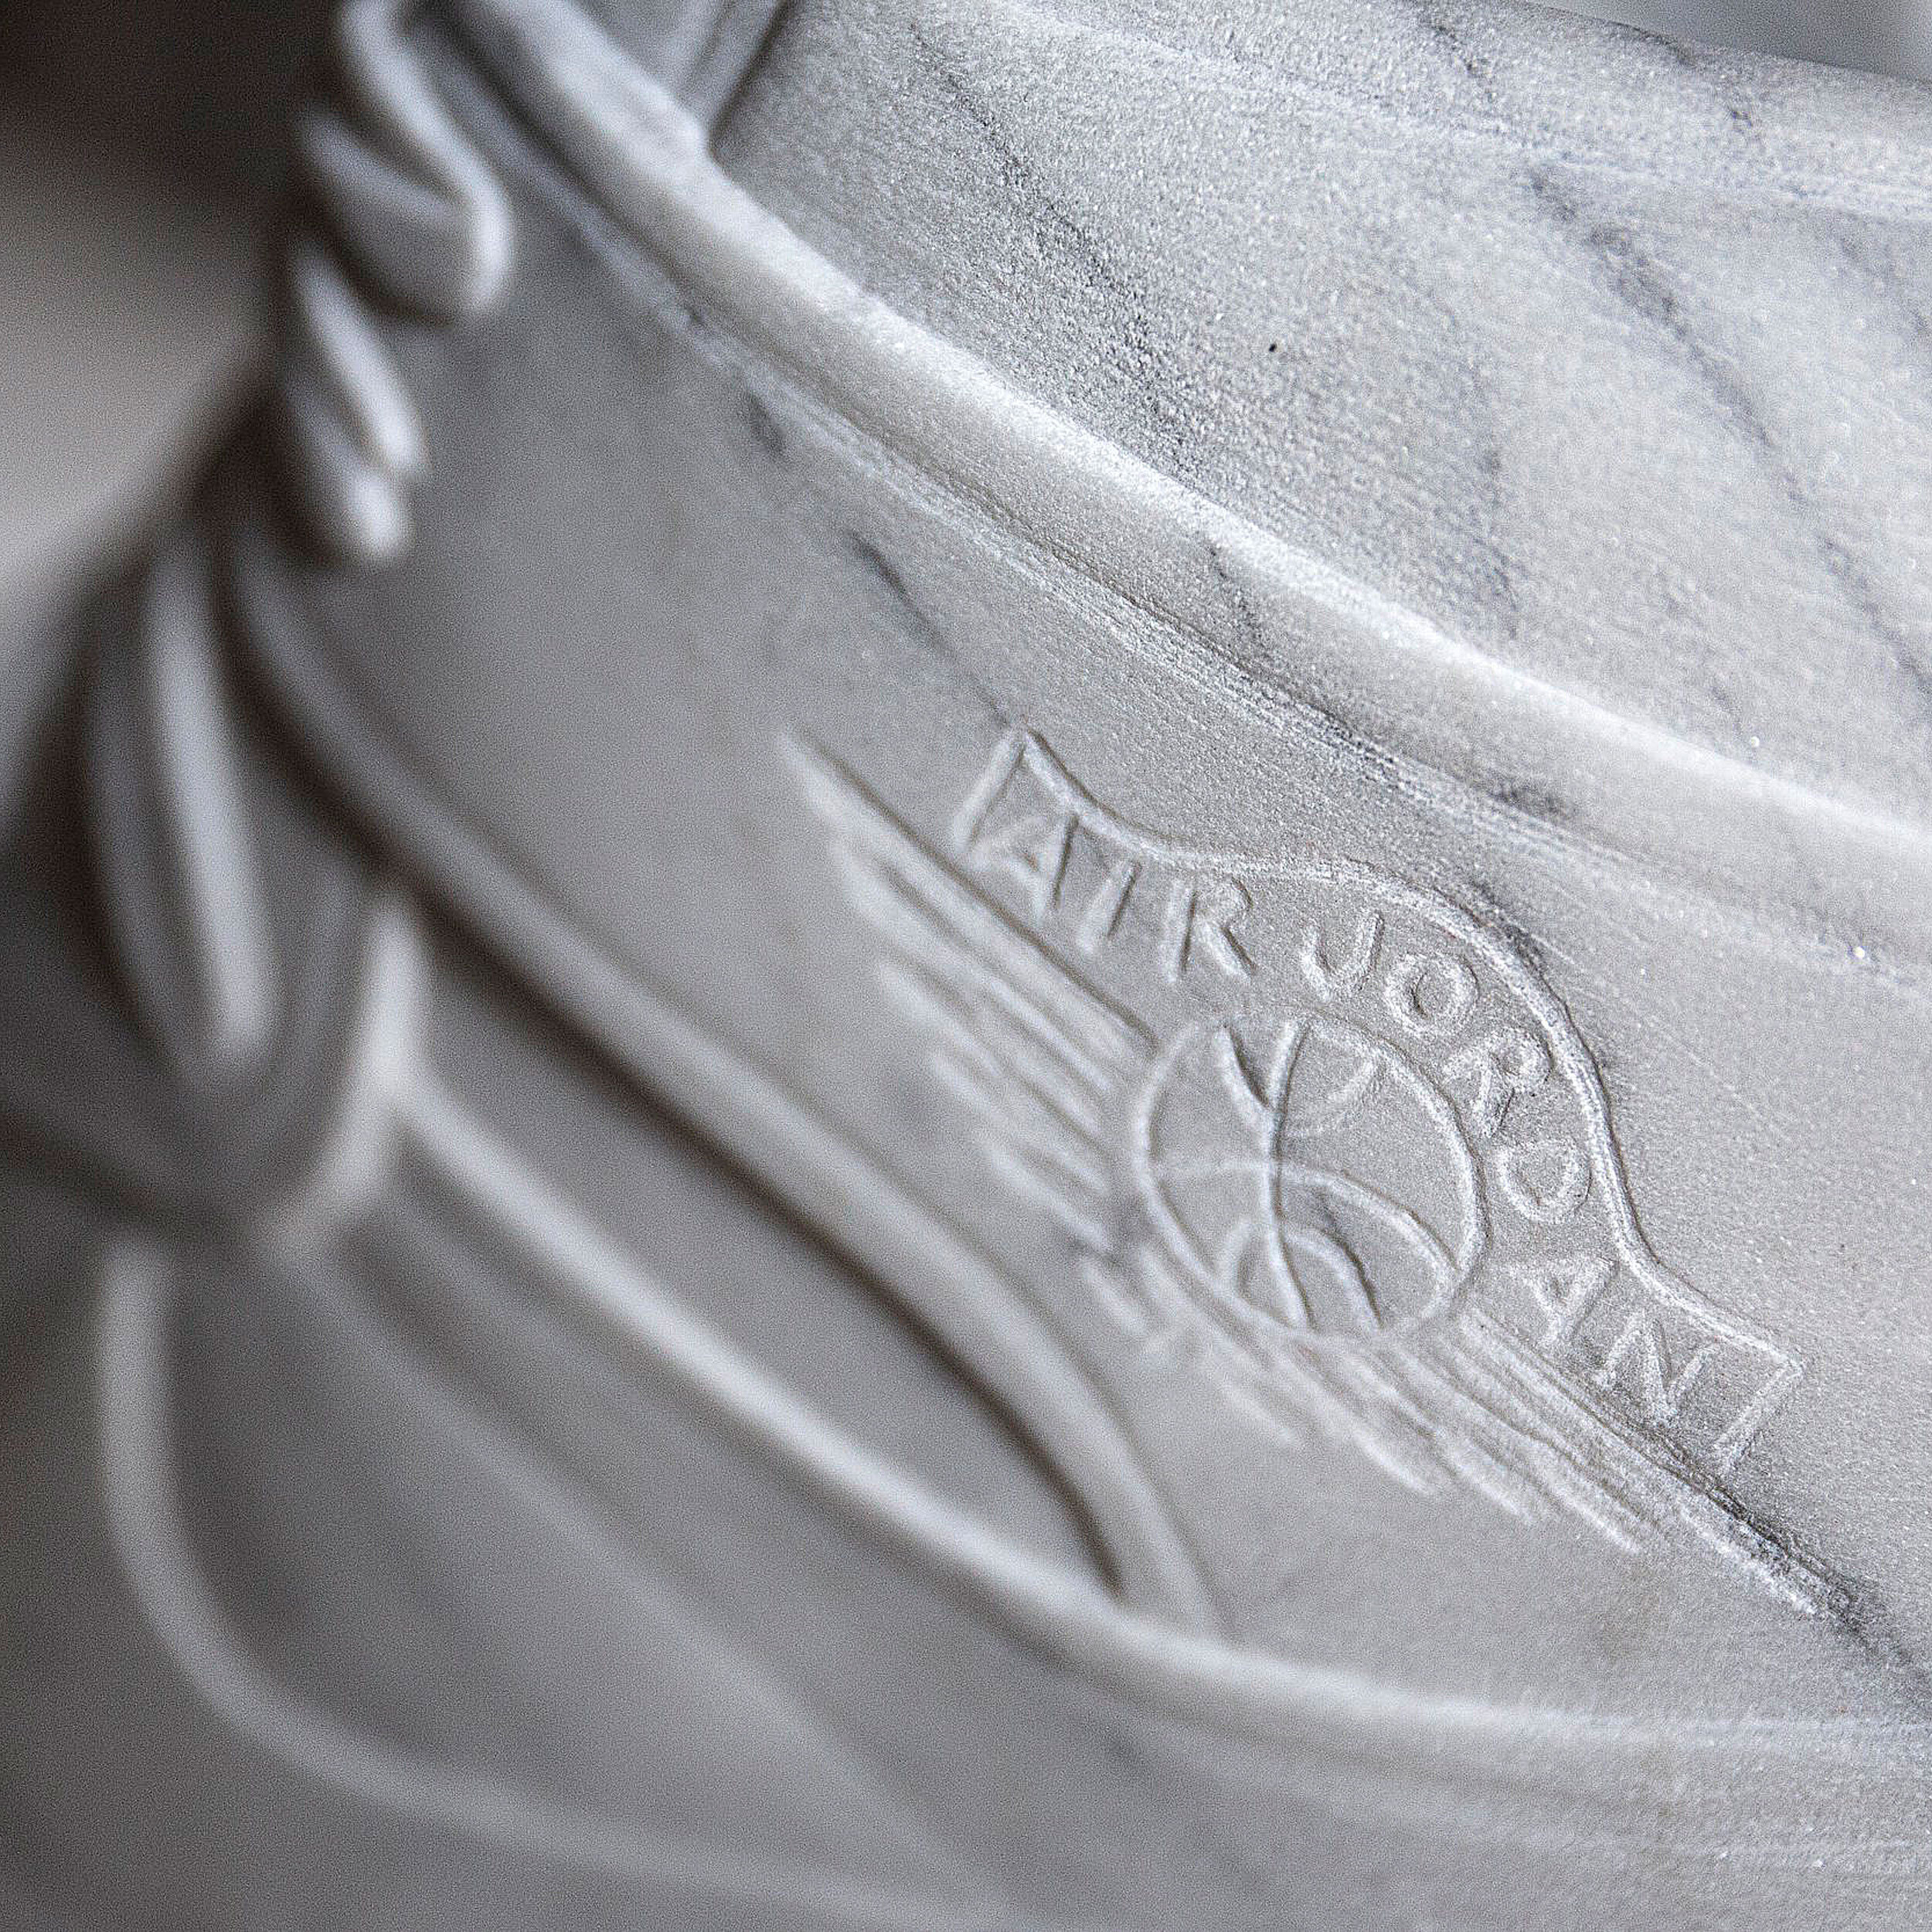 Hand inscribed marble shoe sculpted by Alasdair Thomson.